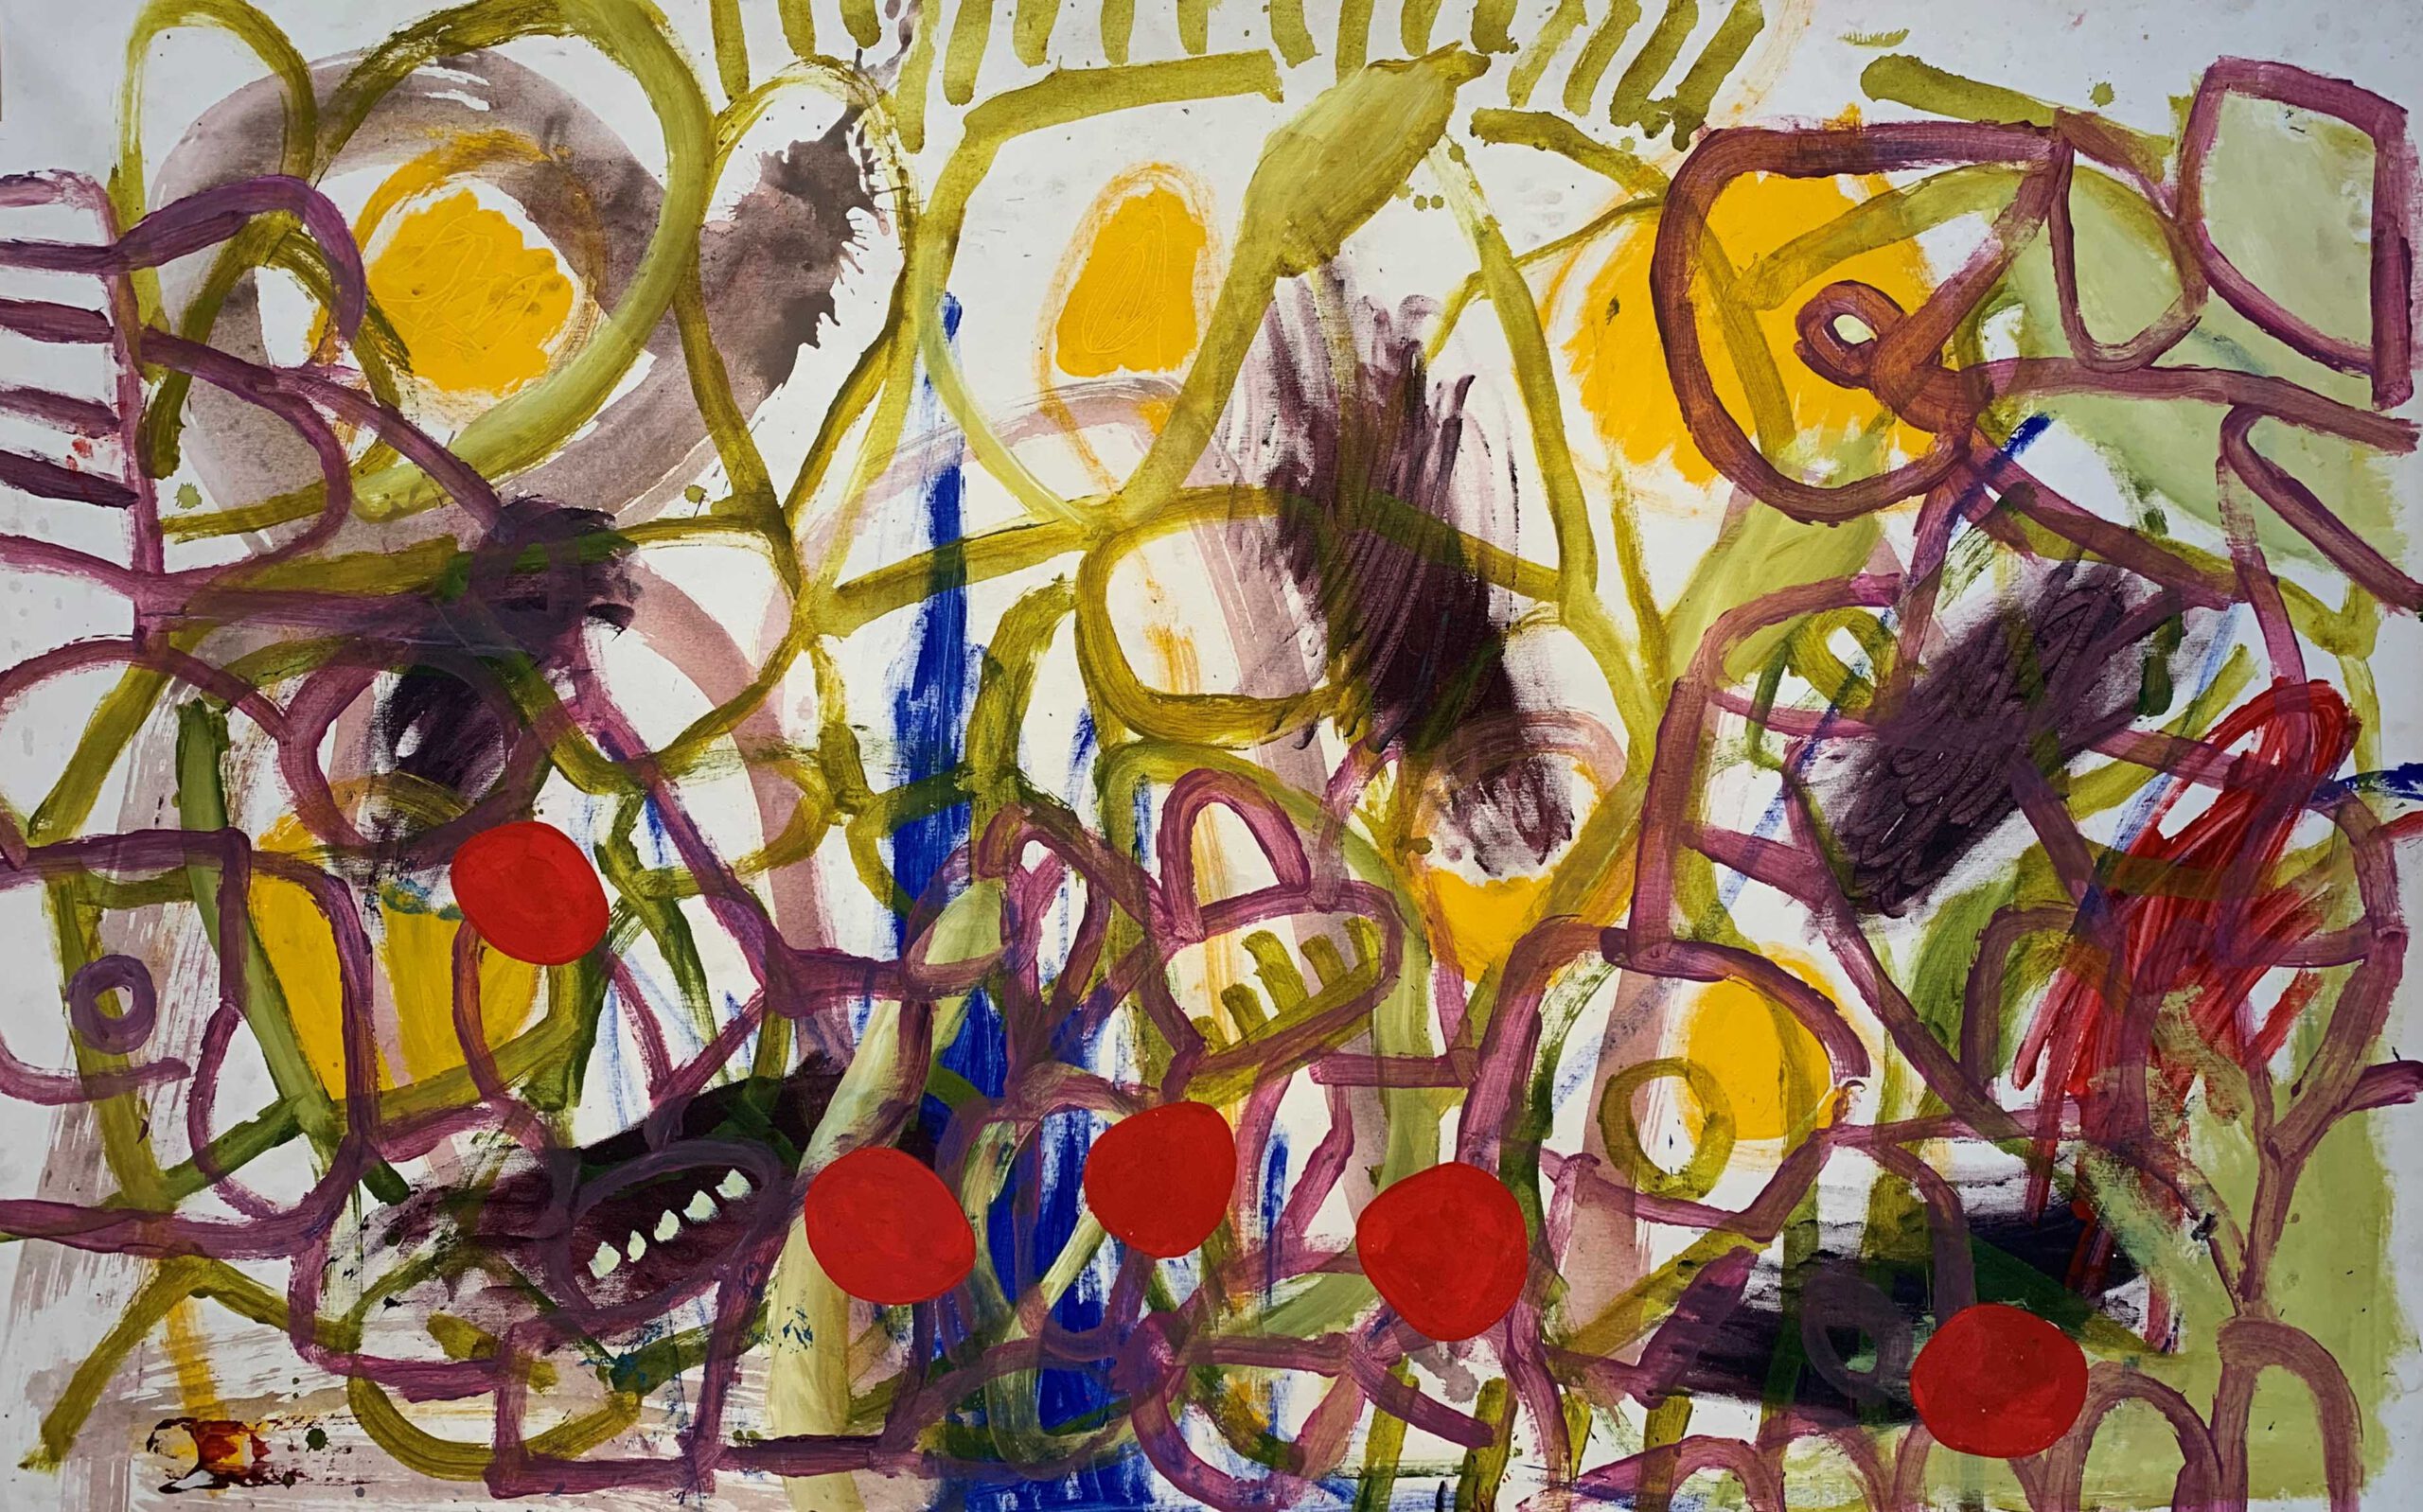 Poulet_Untitled (June gully)_acrylic on canvas_120 x 200_email